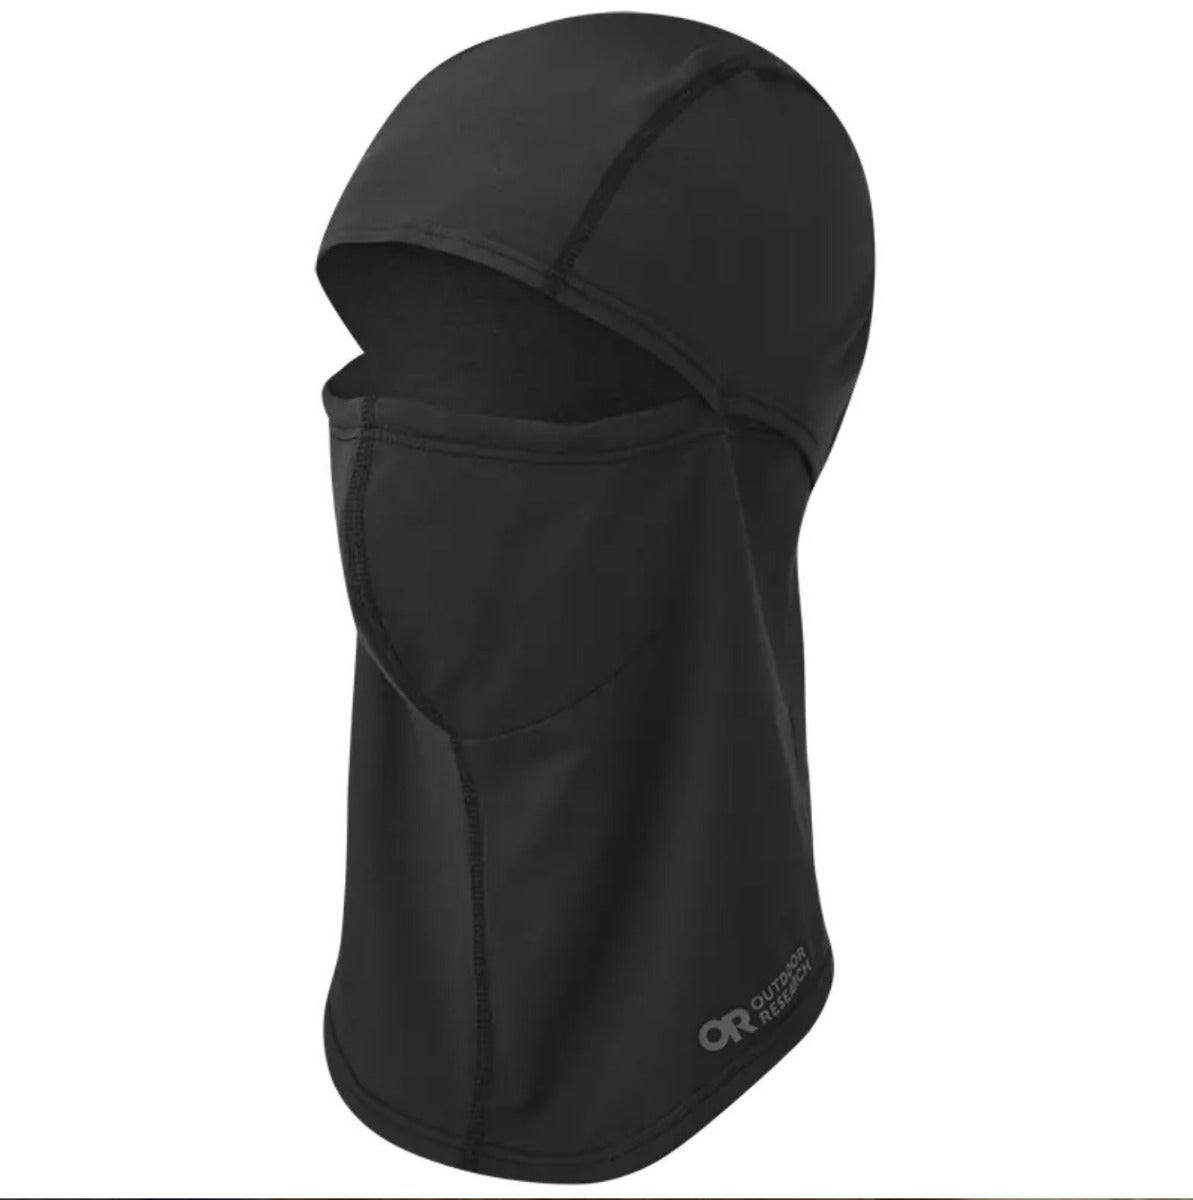 The Protective Essentials Midweight Balaclava Kit